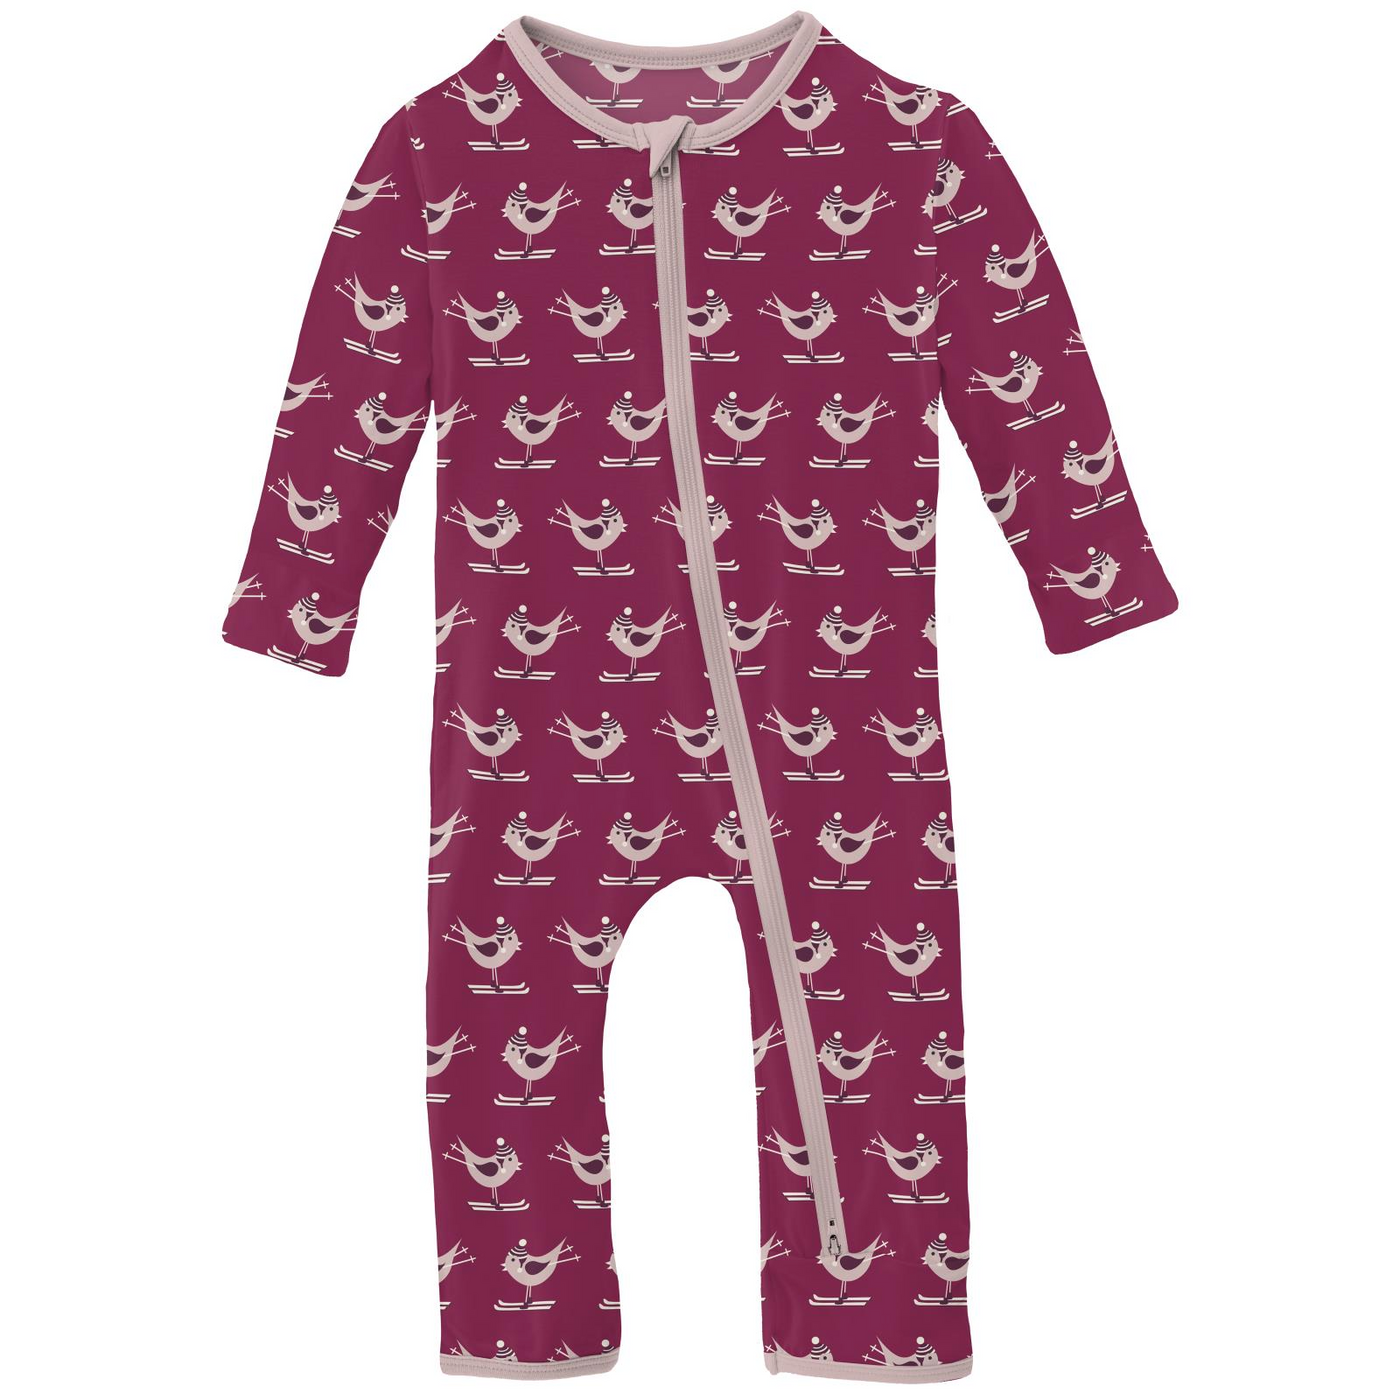 Kickee Pants Coverall with 2 Way Zipper: Berry Ski Birds